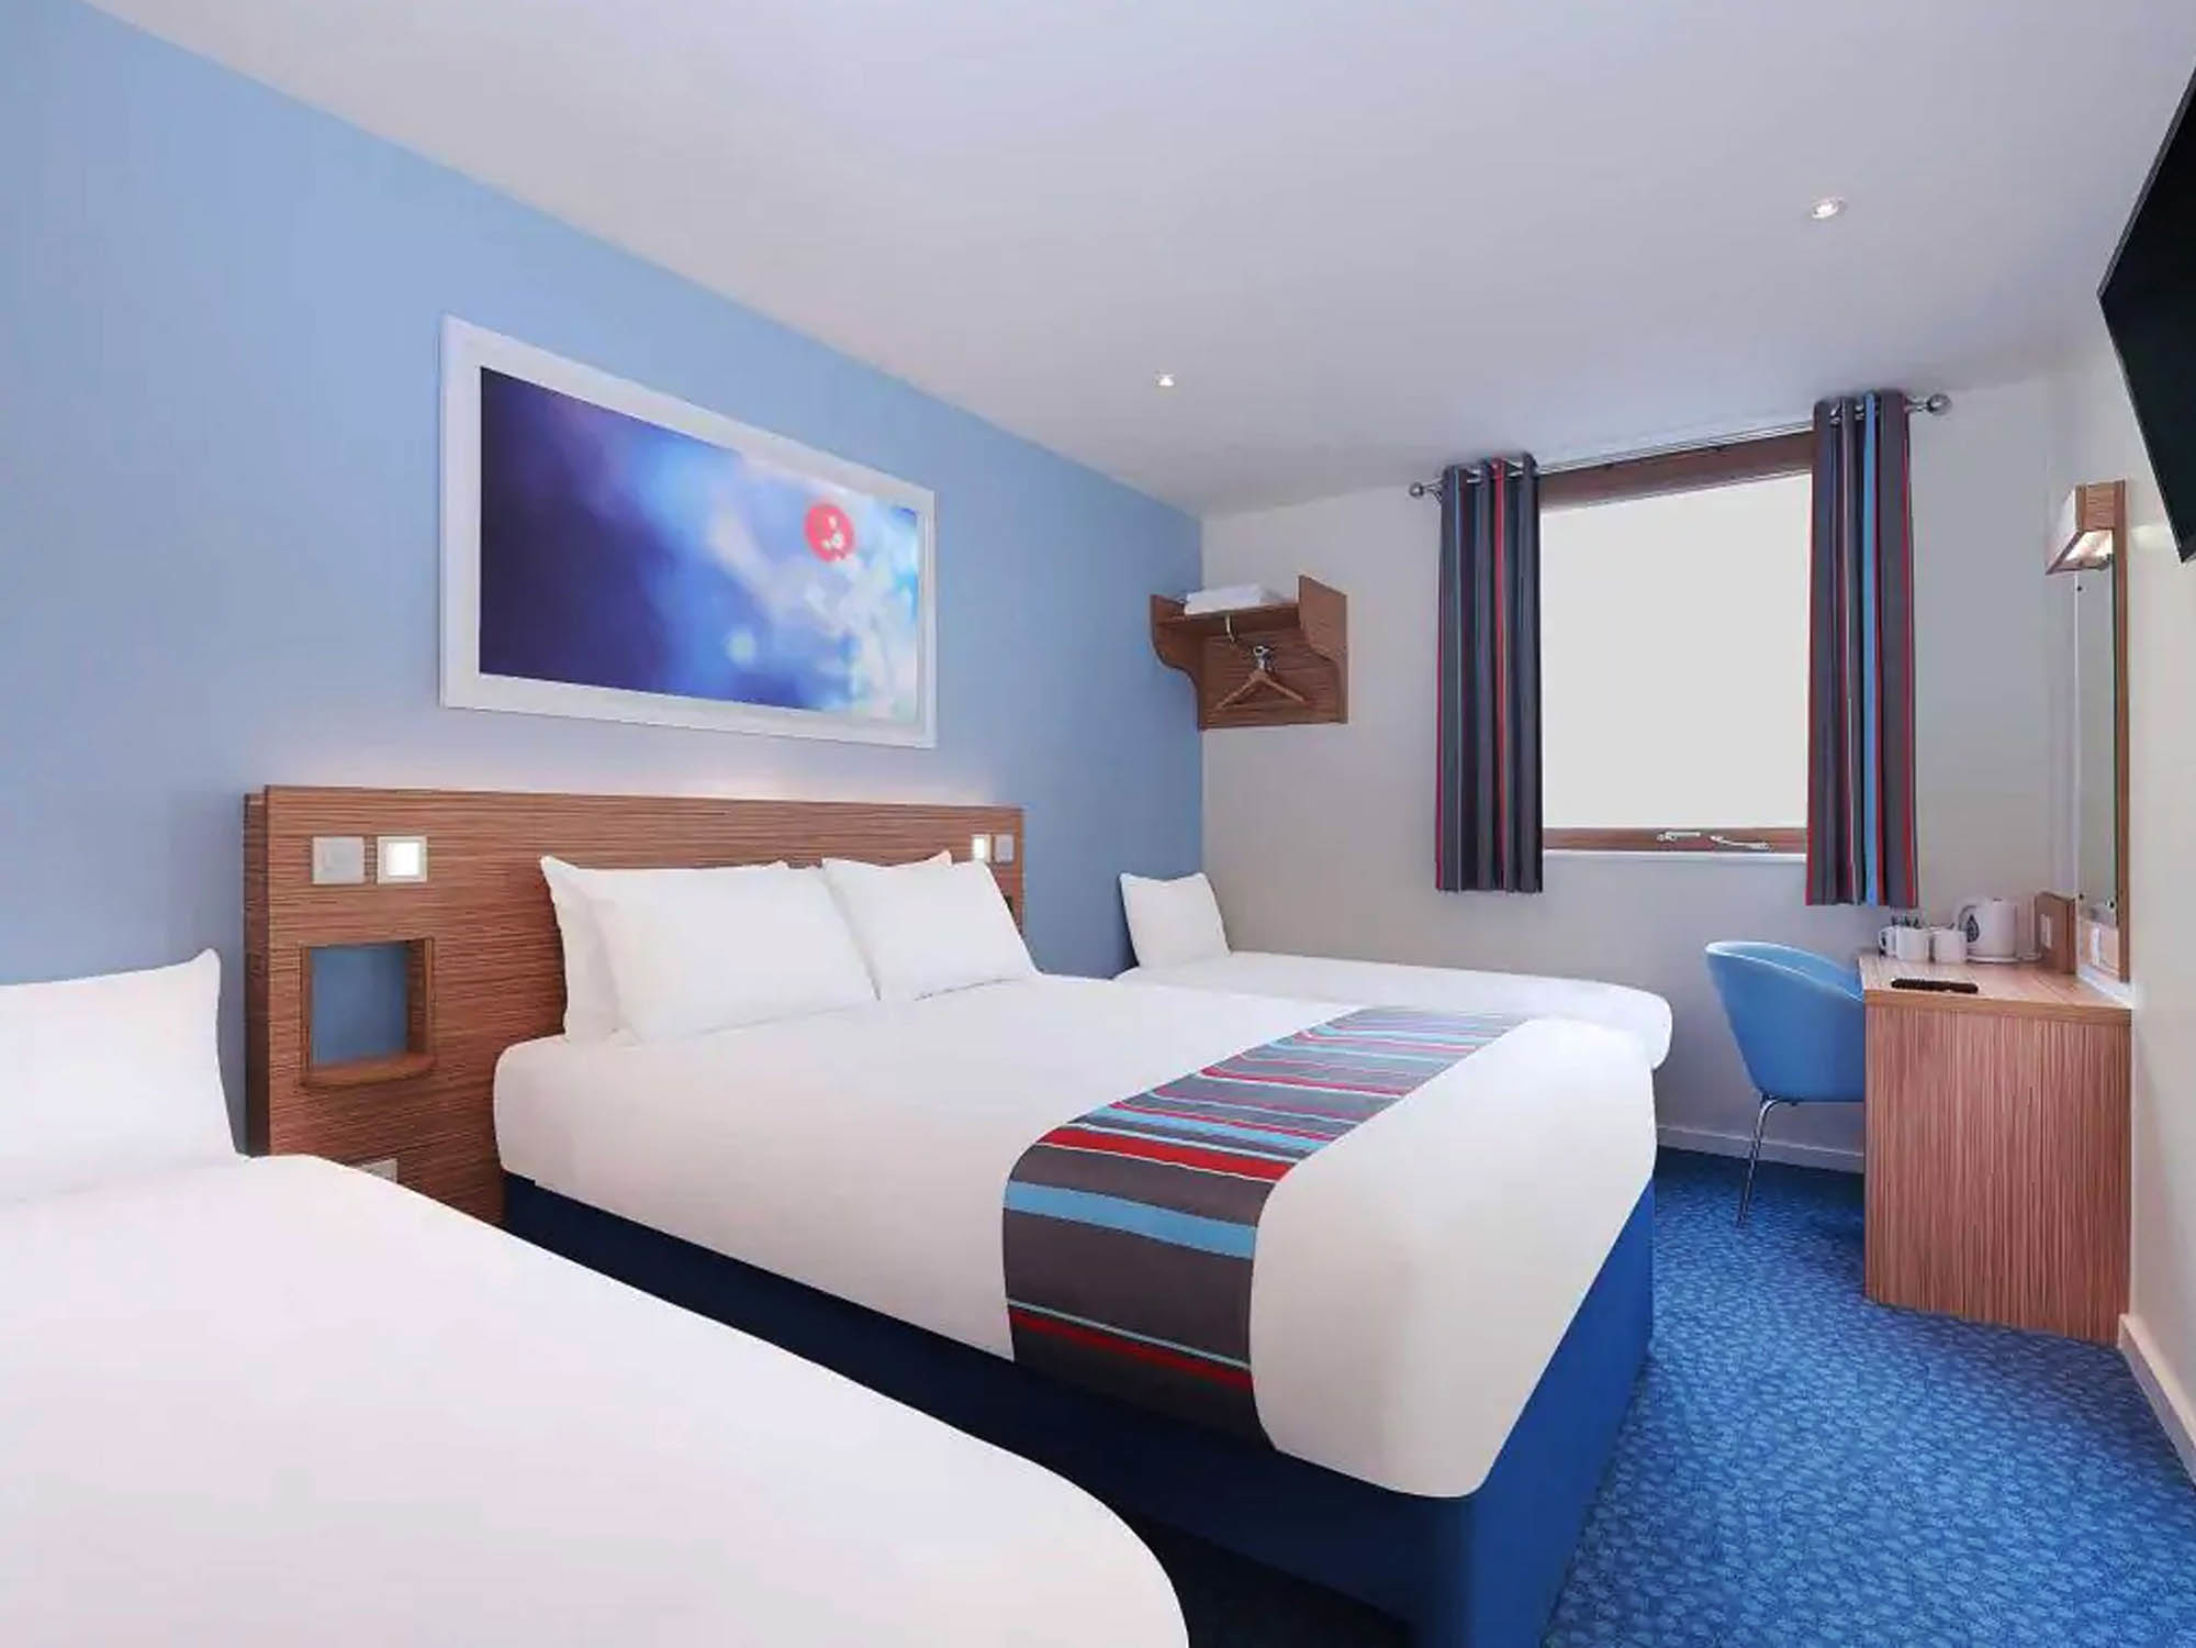 Best Hotels in Newcastle - Travelodge Quayside